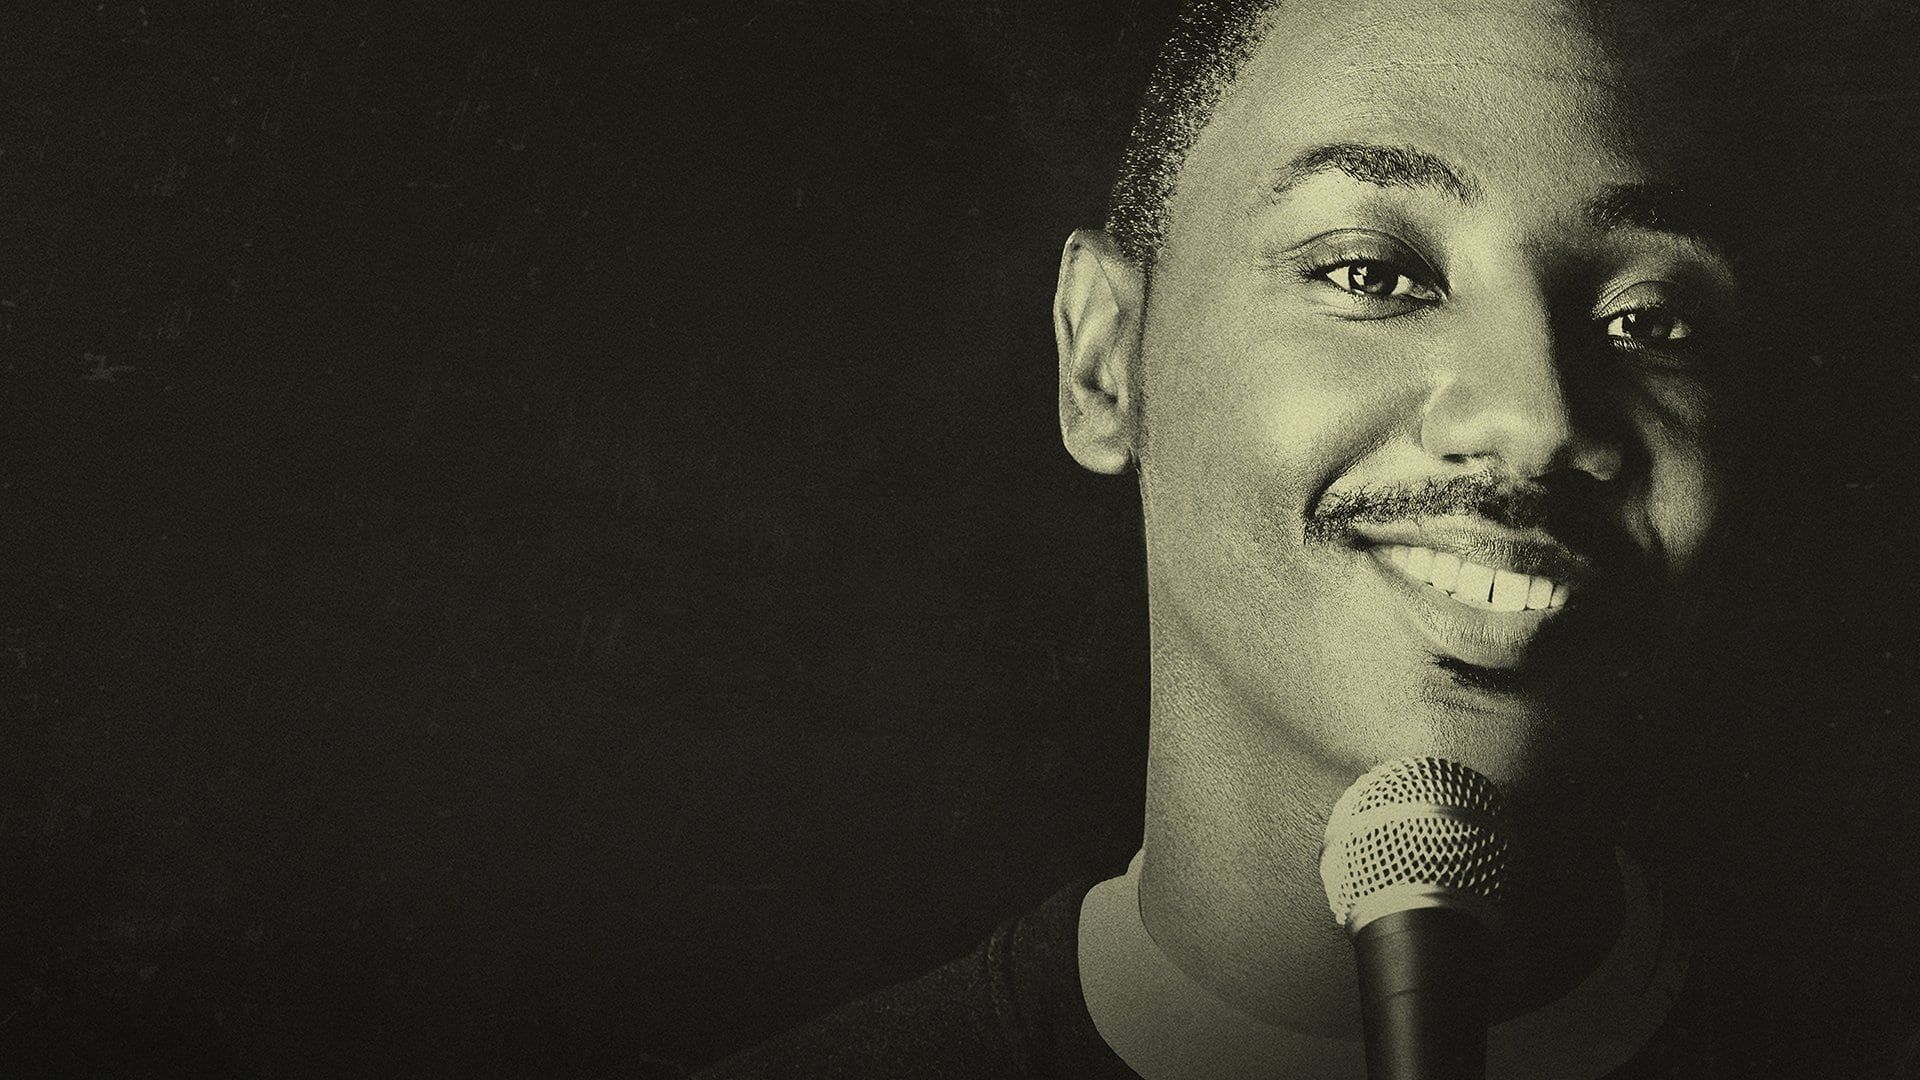 Jerrod Carmichael: Love at the Store background